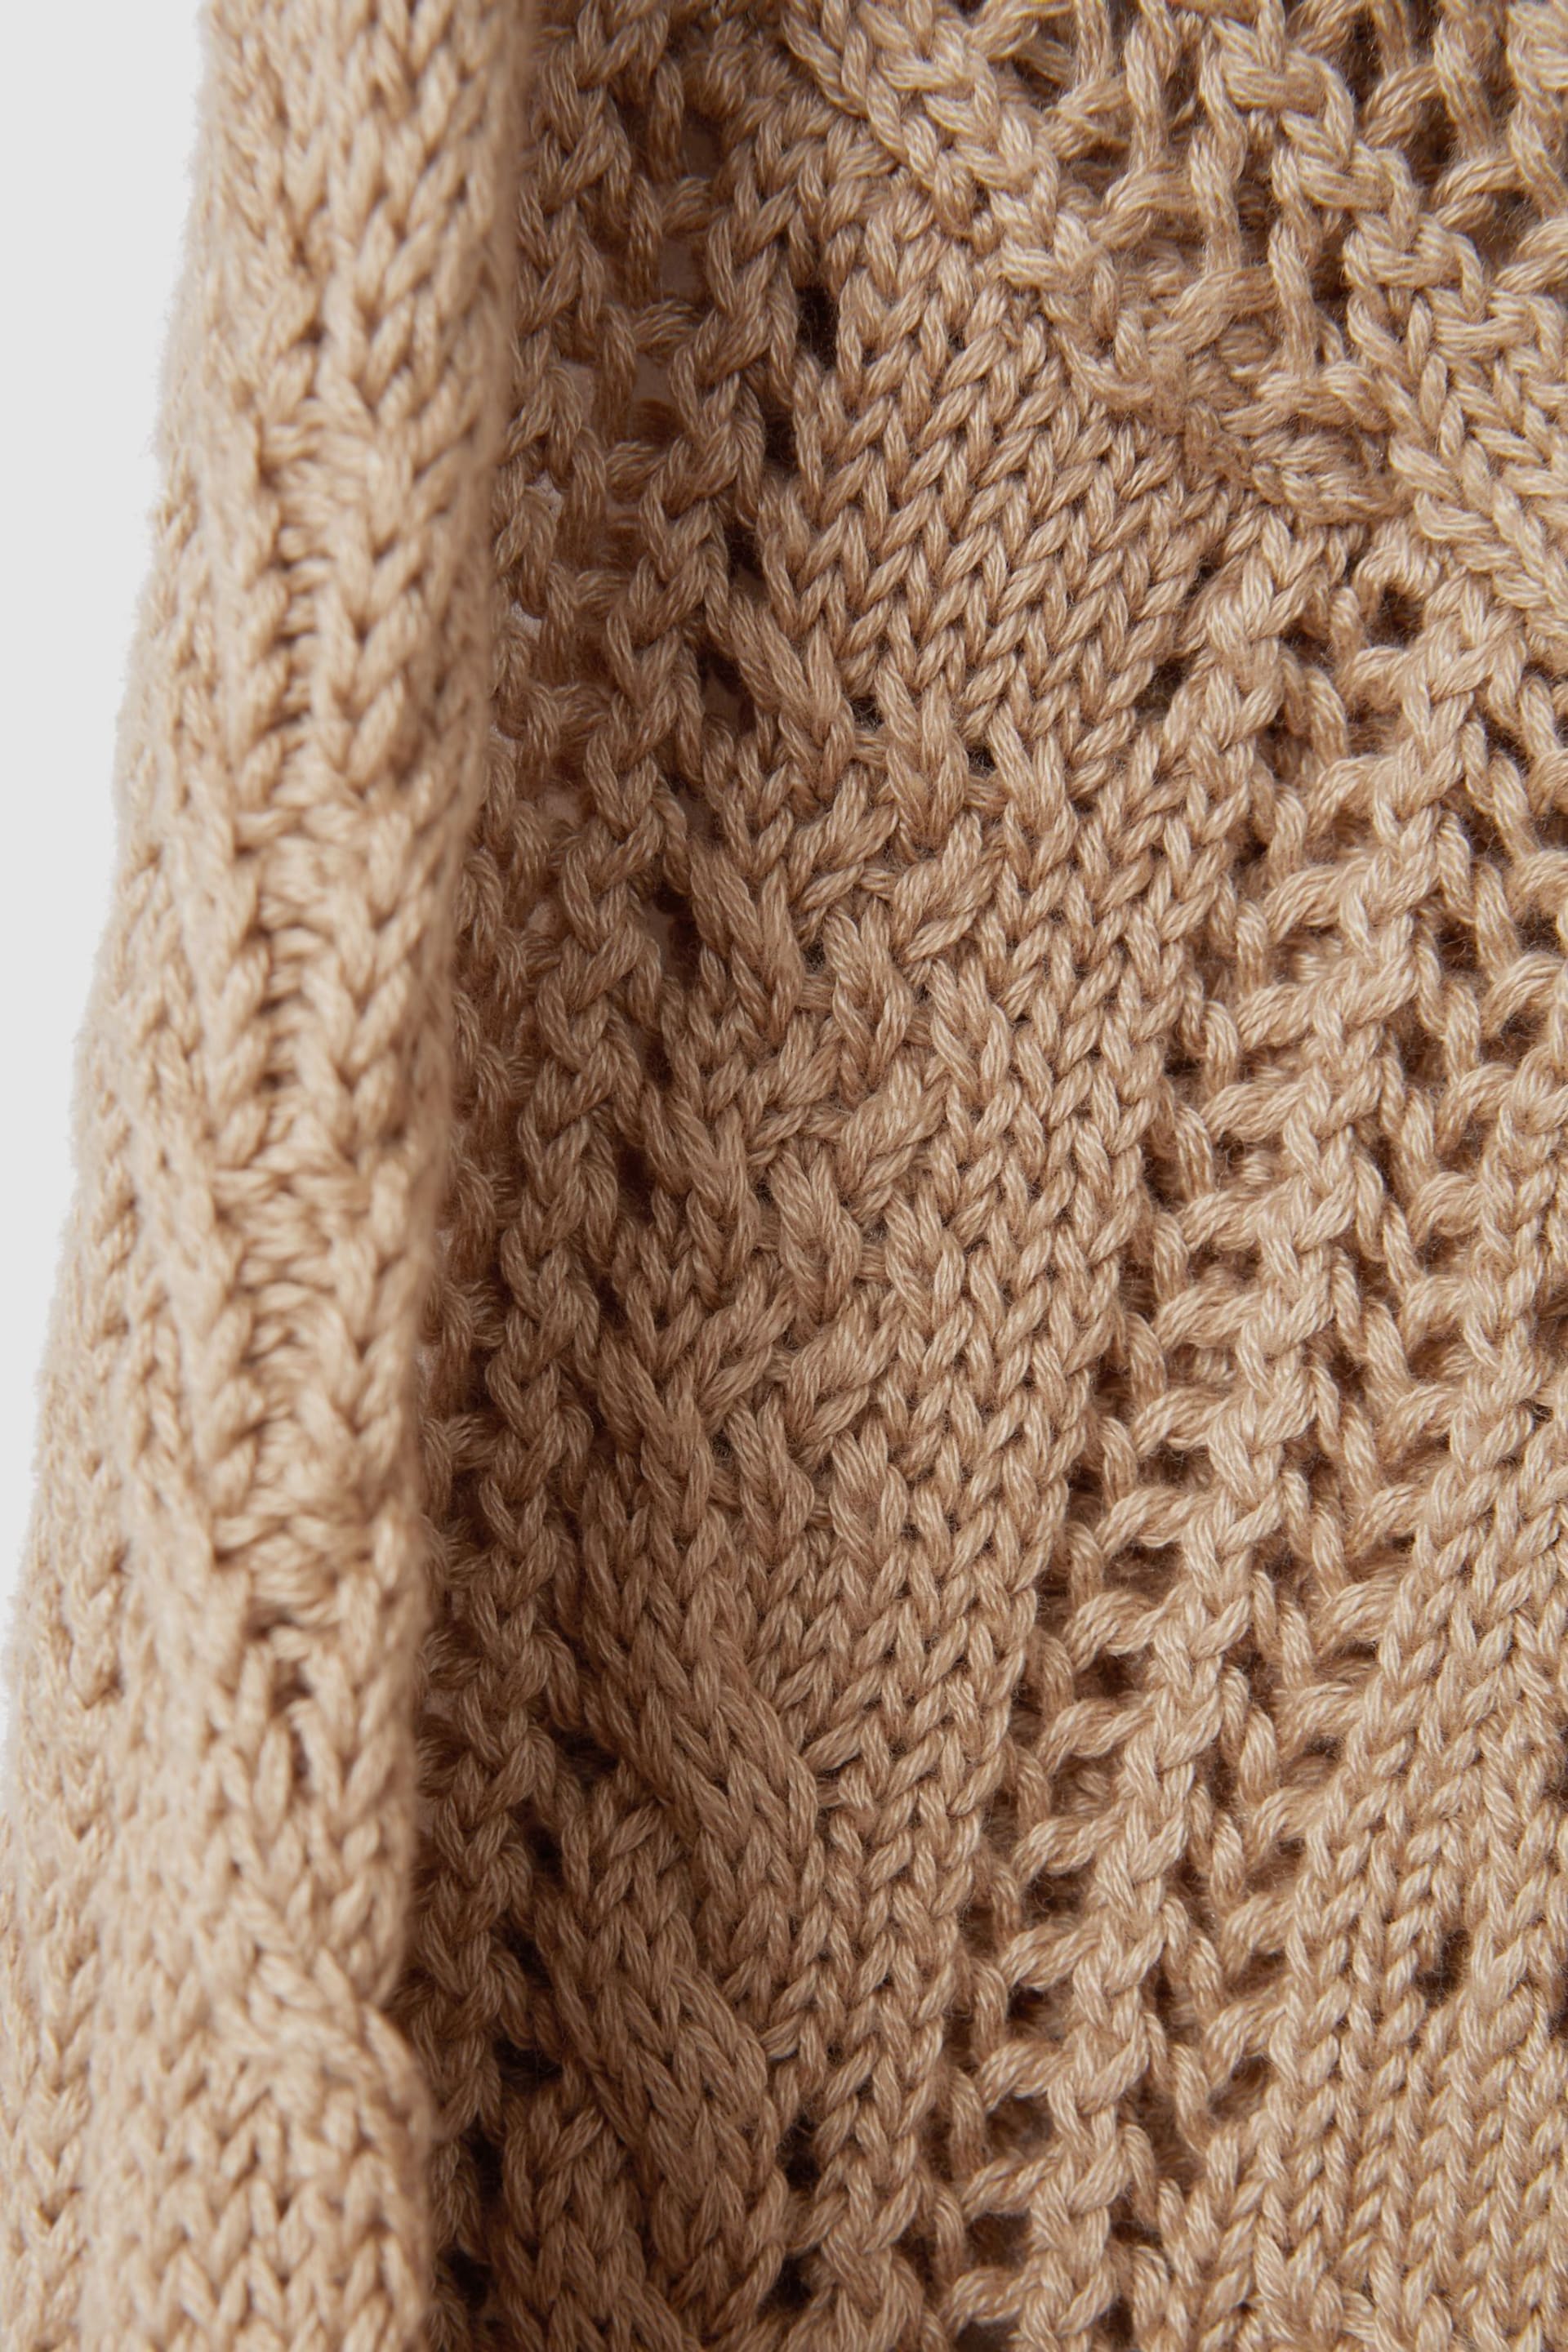 Reiss Neutral Tiffany Cotton Blend Open Stitch Cardigan - Image 6 of 6